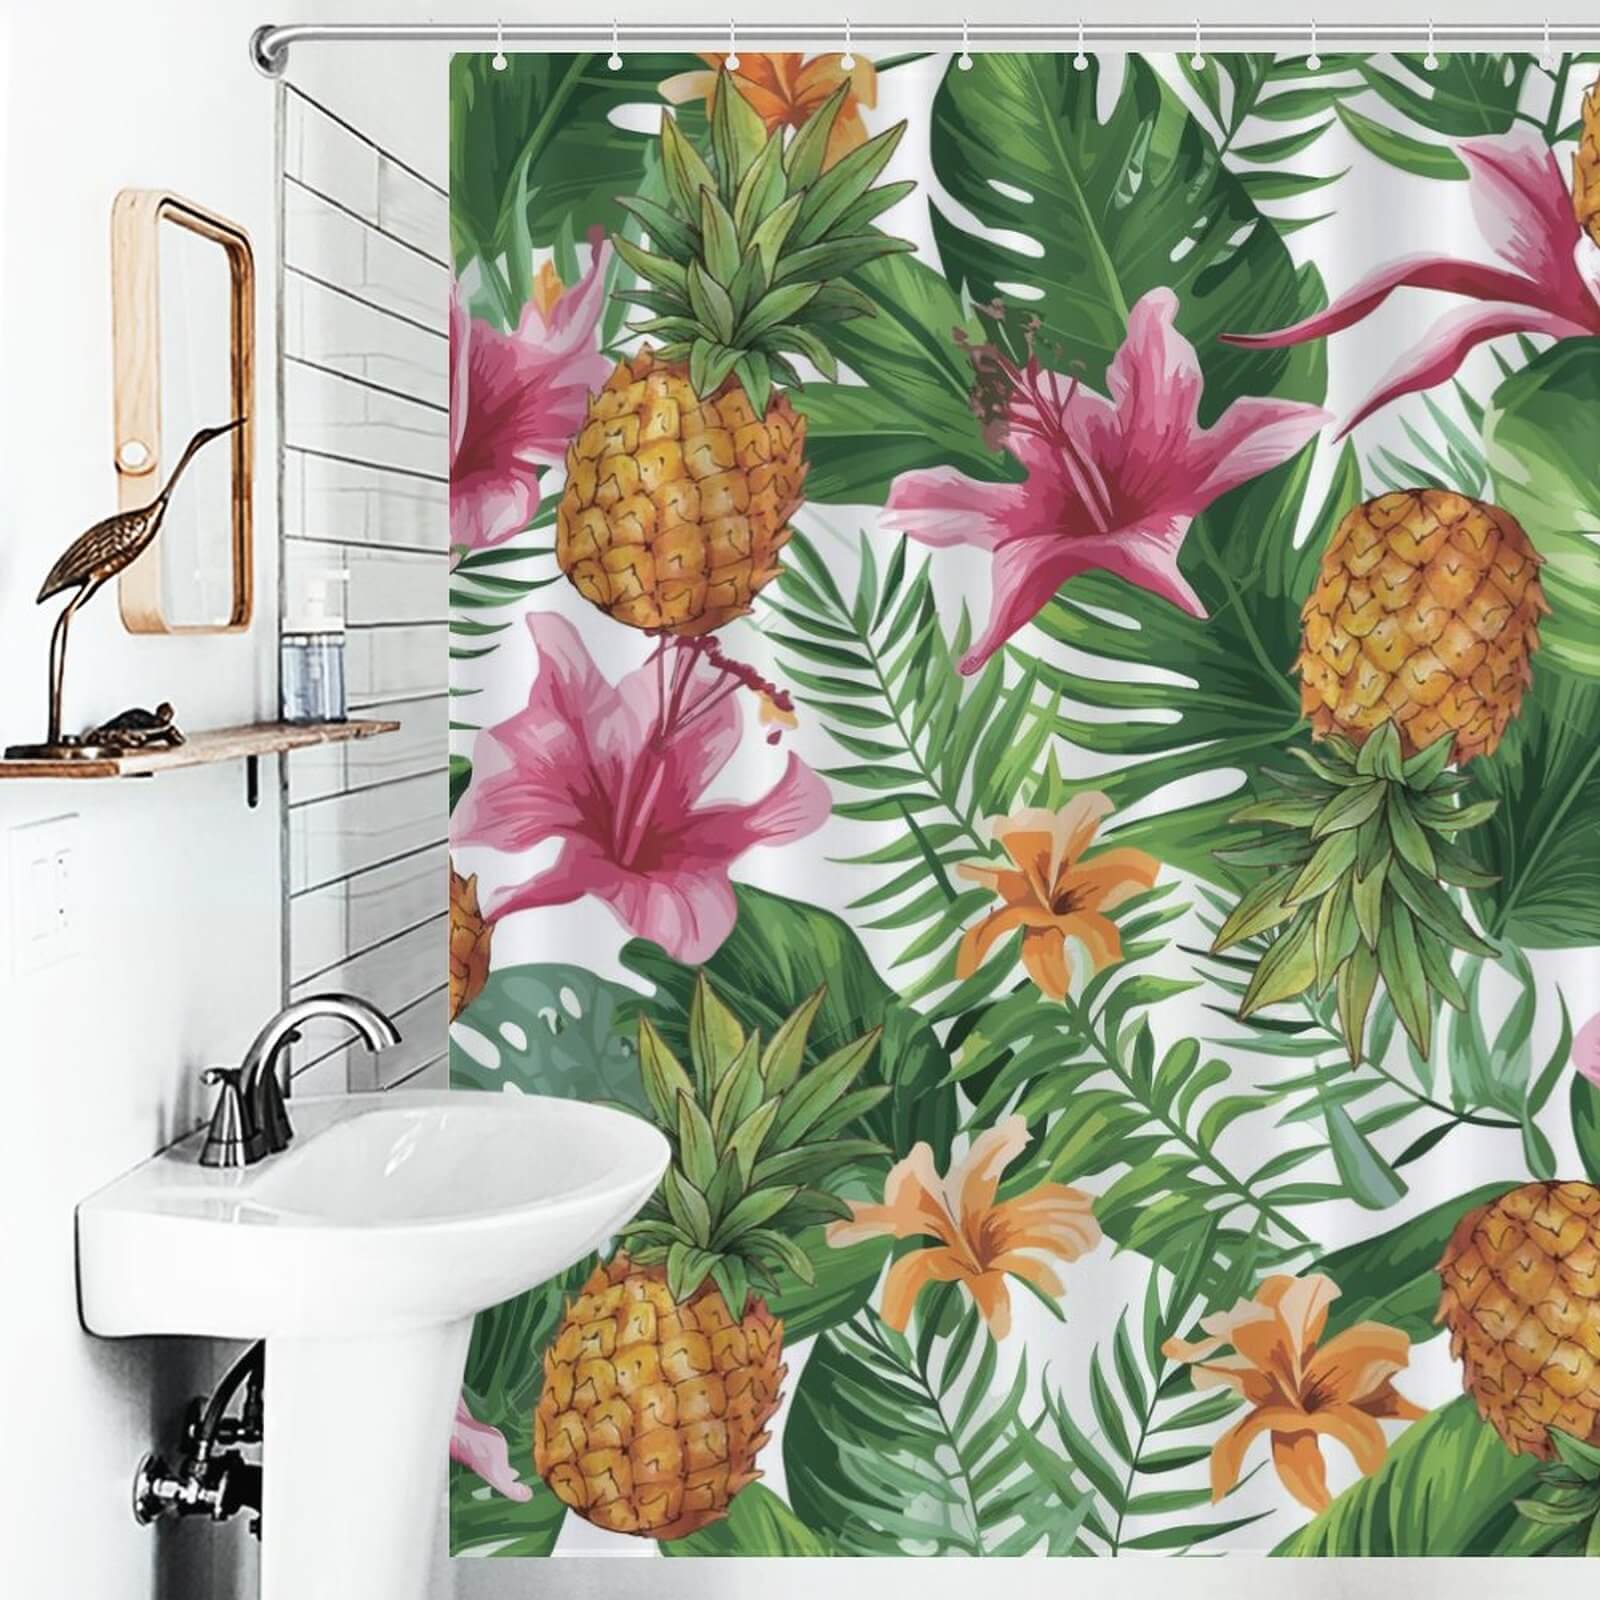 Add a touch of tropical oasis to your bathroom decor with this Tropical Pineapple shower curtain from Cotton Cat adorned with lilies.